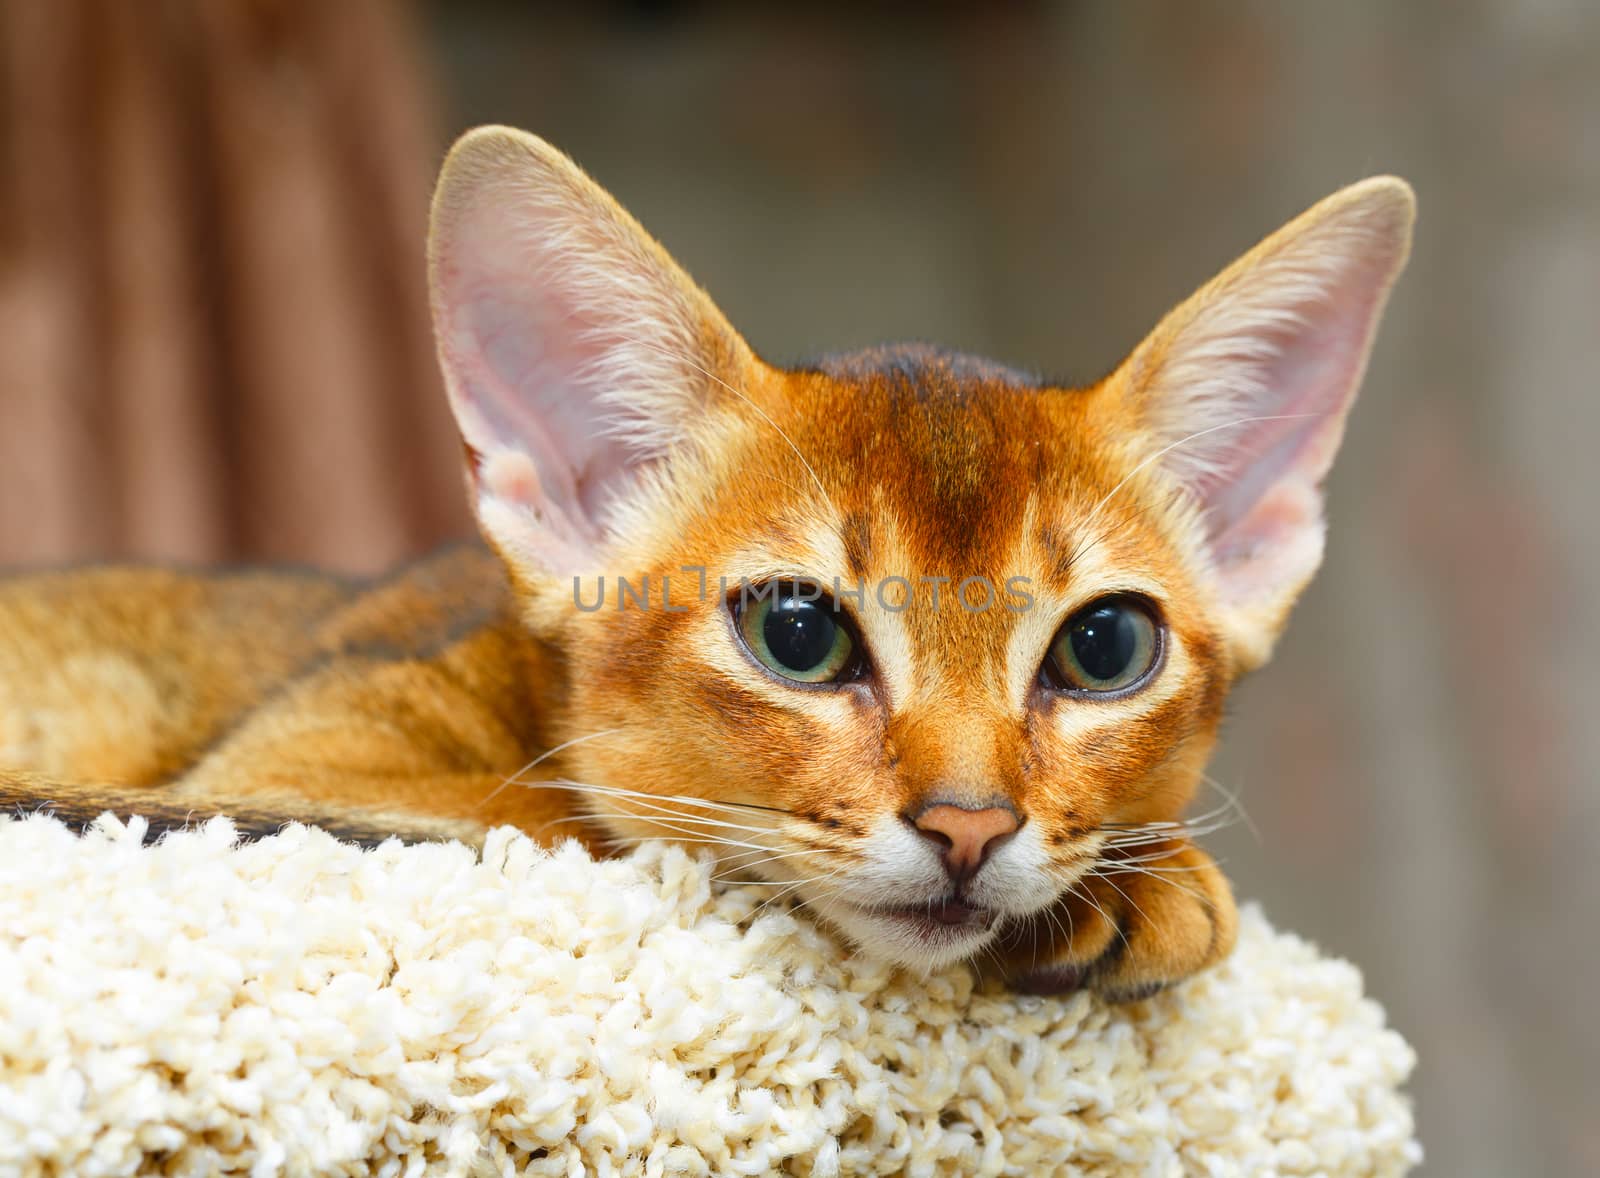 Young abyssinian cat lying at cat tree furniture